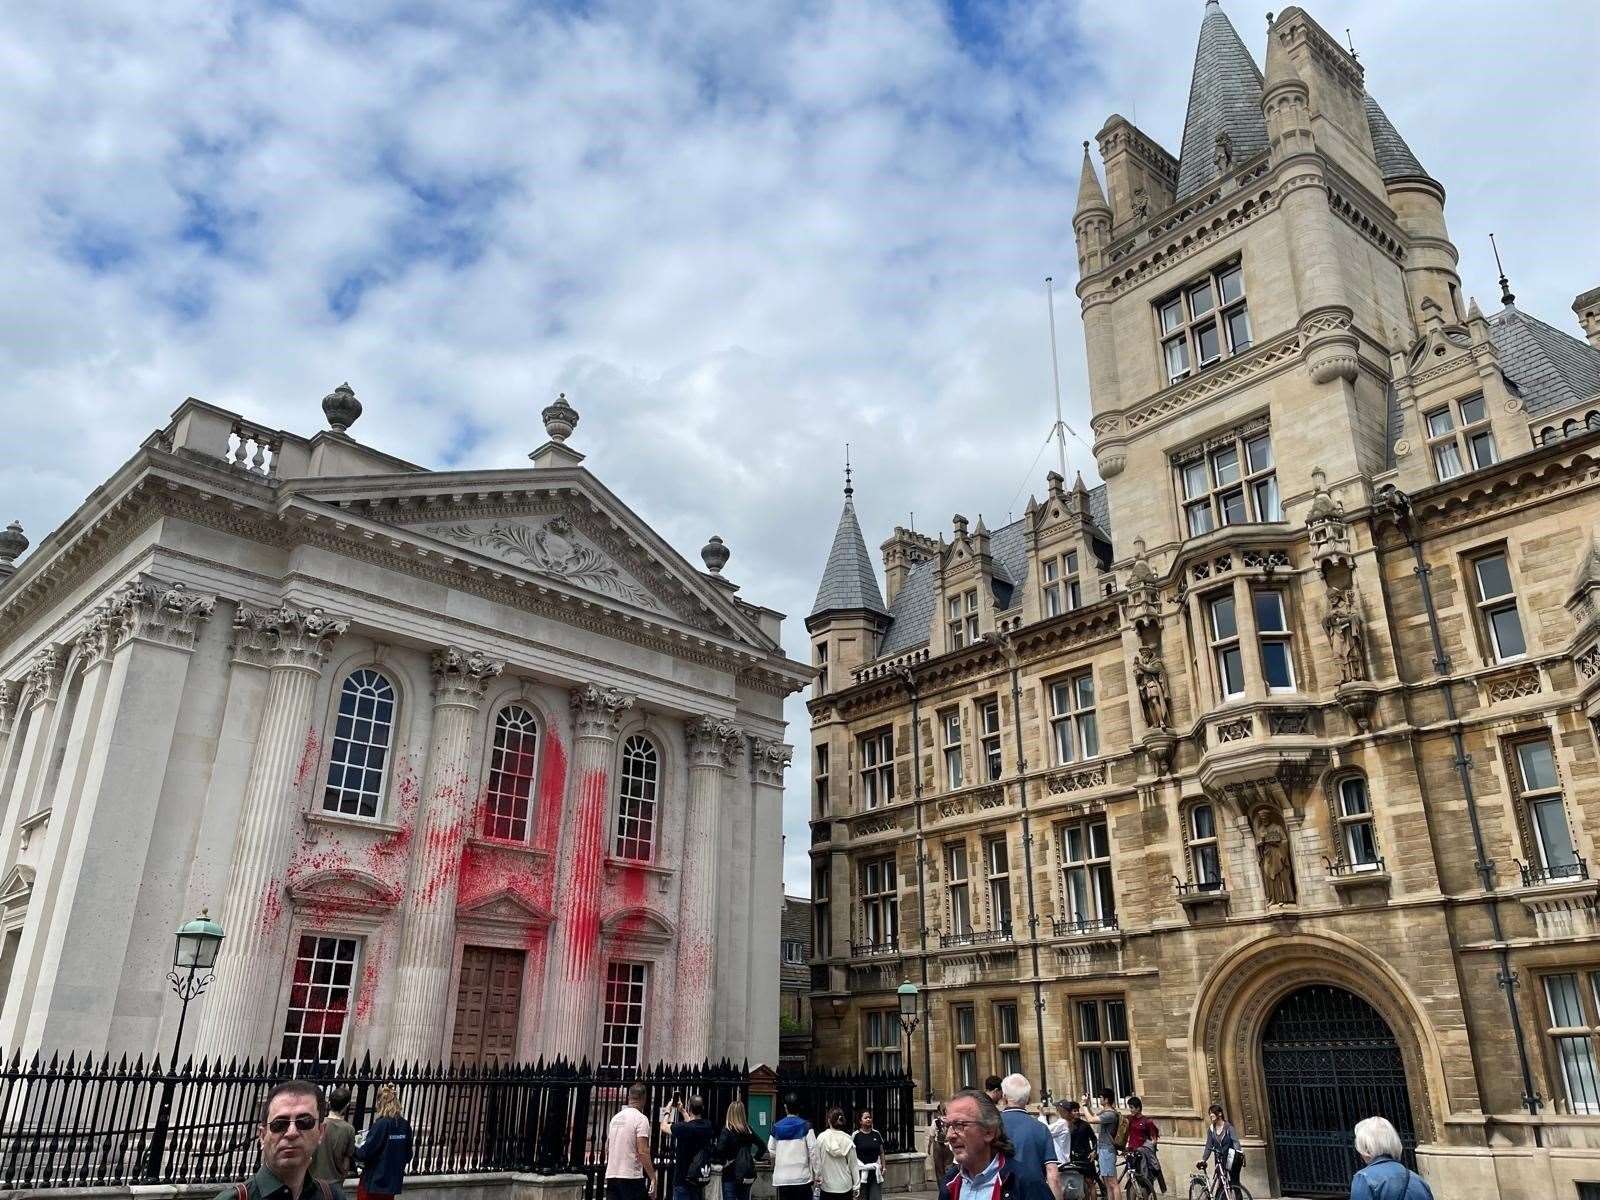 Senate House after pro-Palestinian protesters sprayed red paint on the historic building at the University of Cambridge (Jane Woodward/PA)